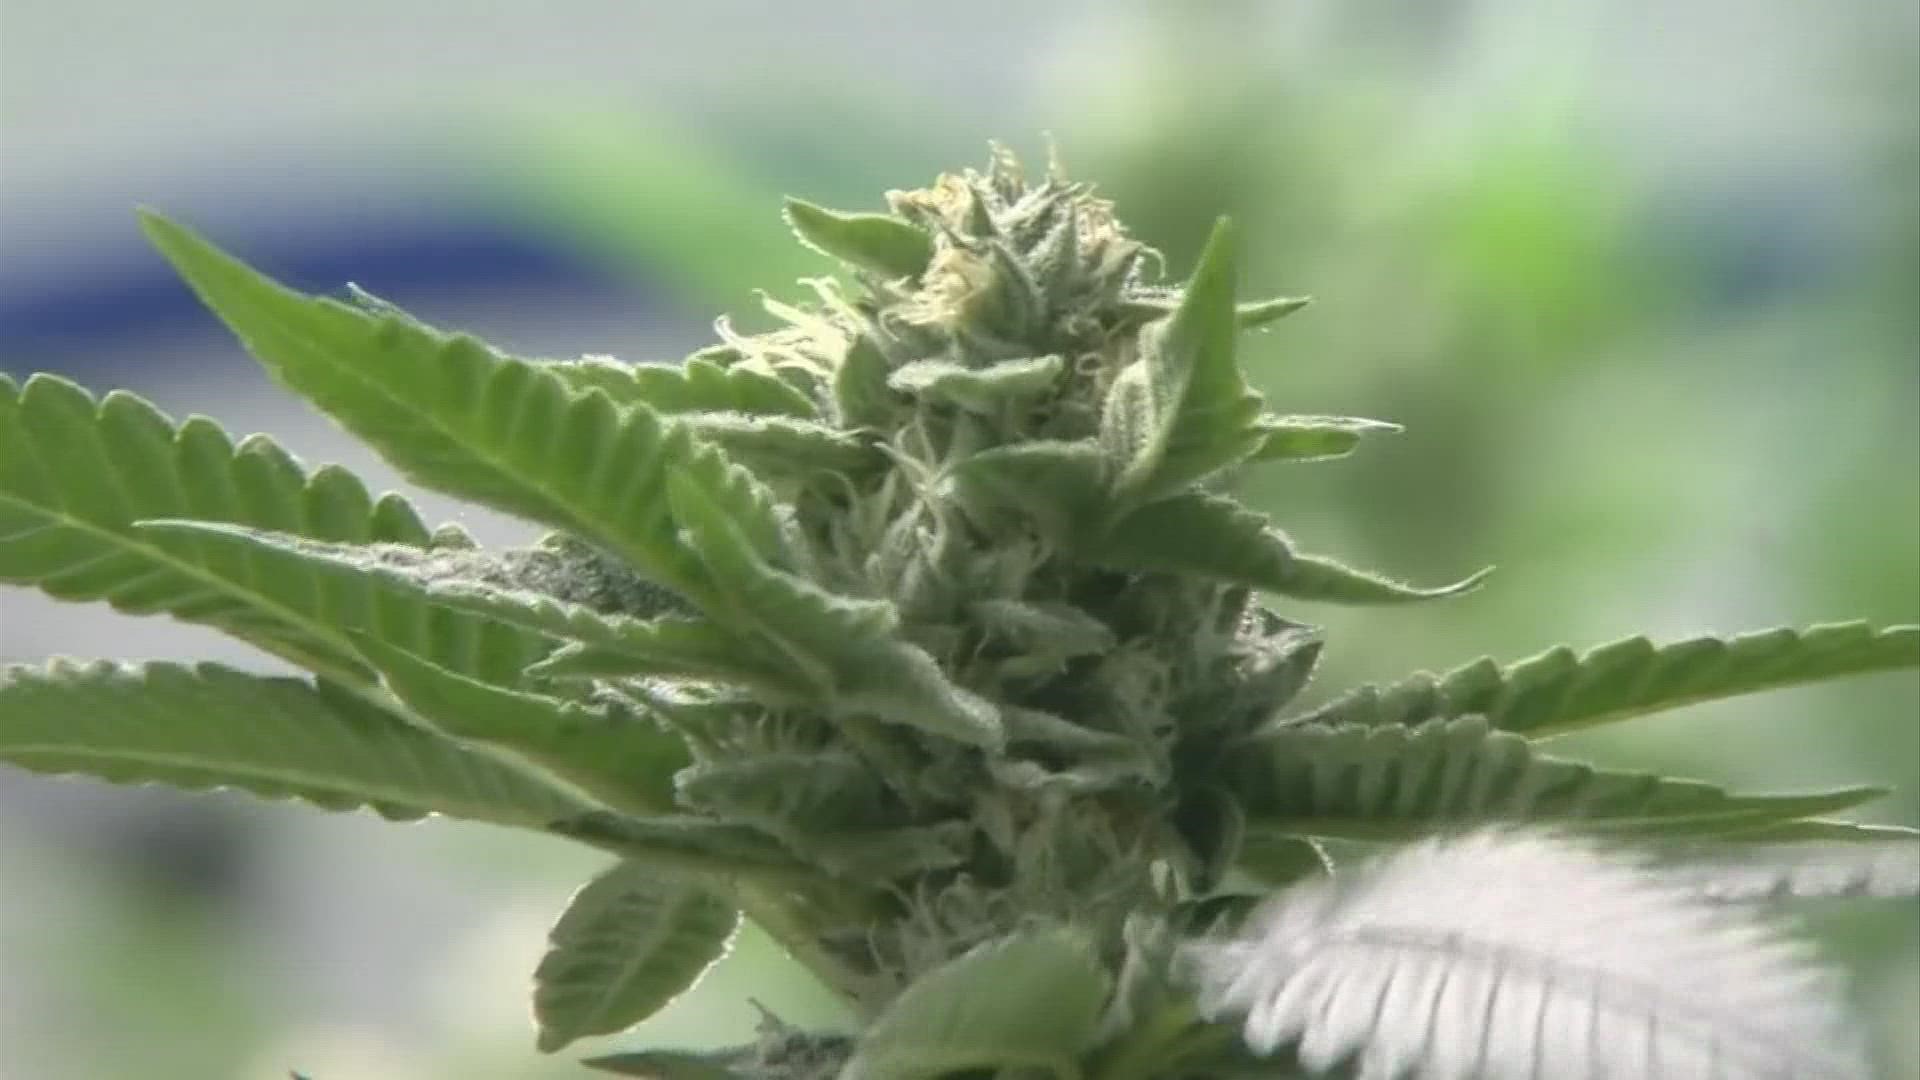 A bill is in the works that would allow recreational Marihuana use for people 21 and older.